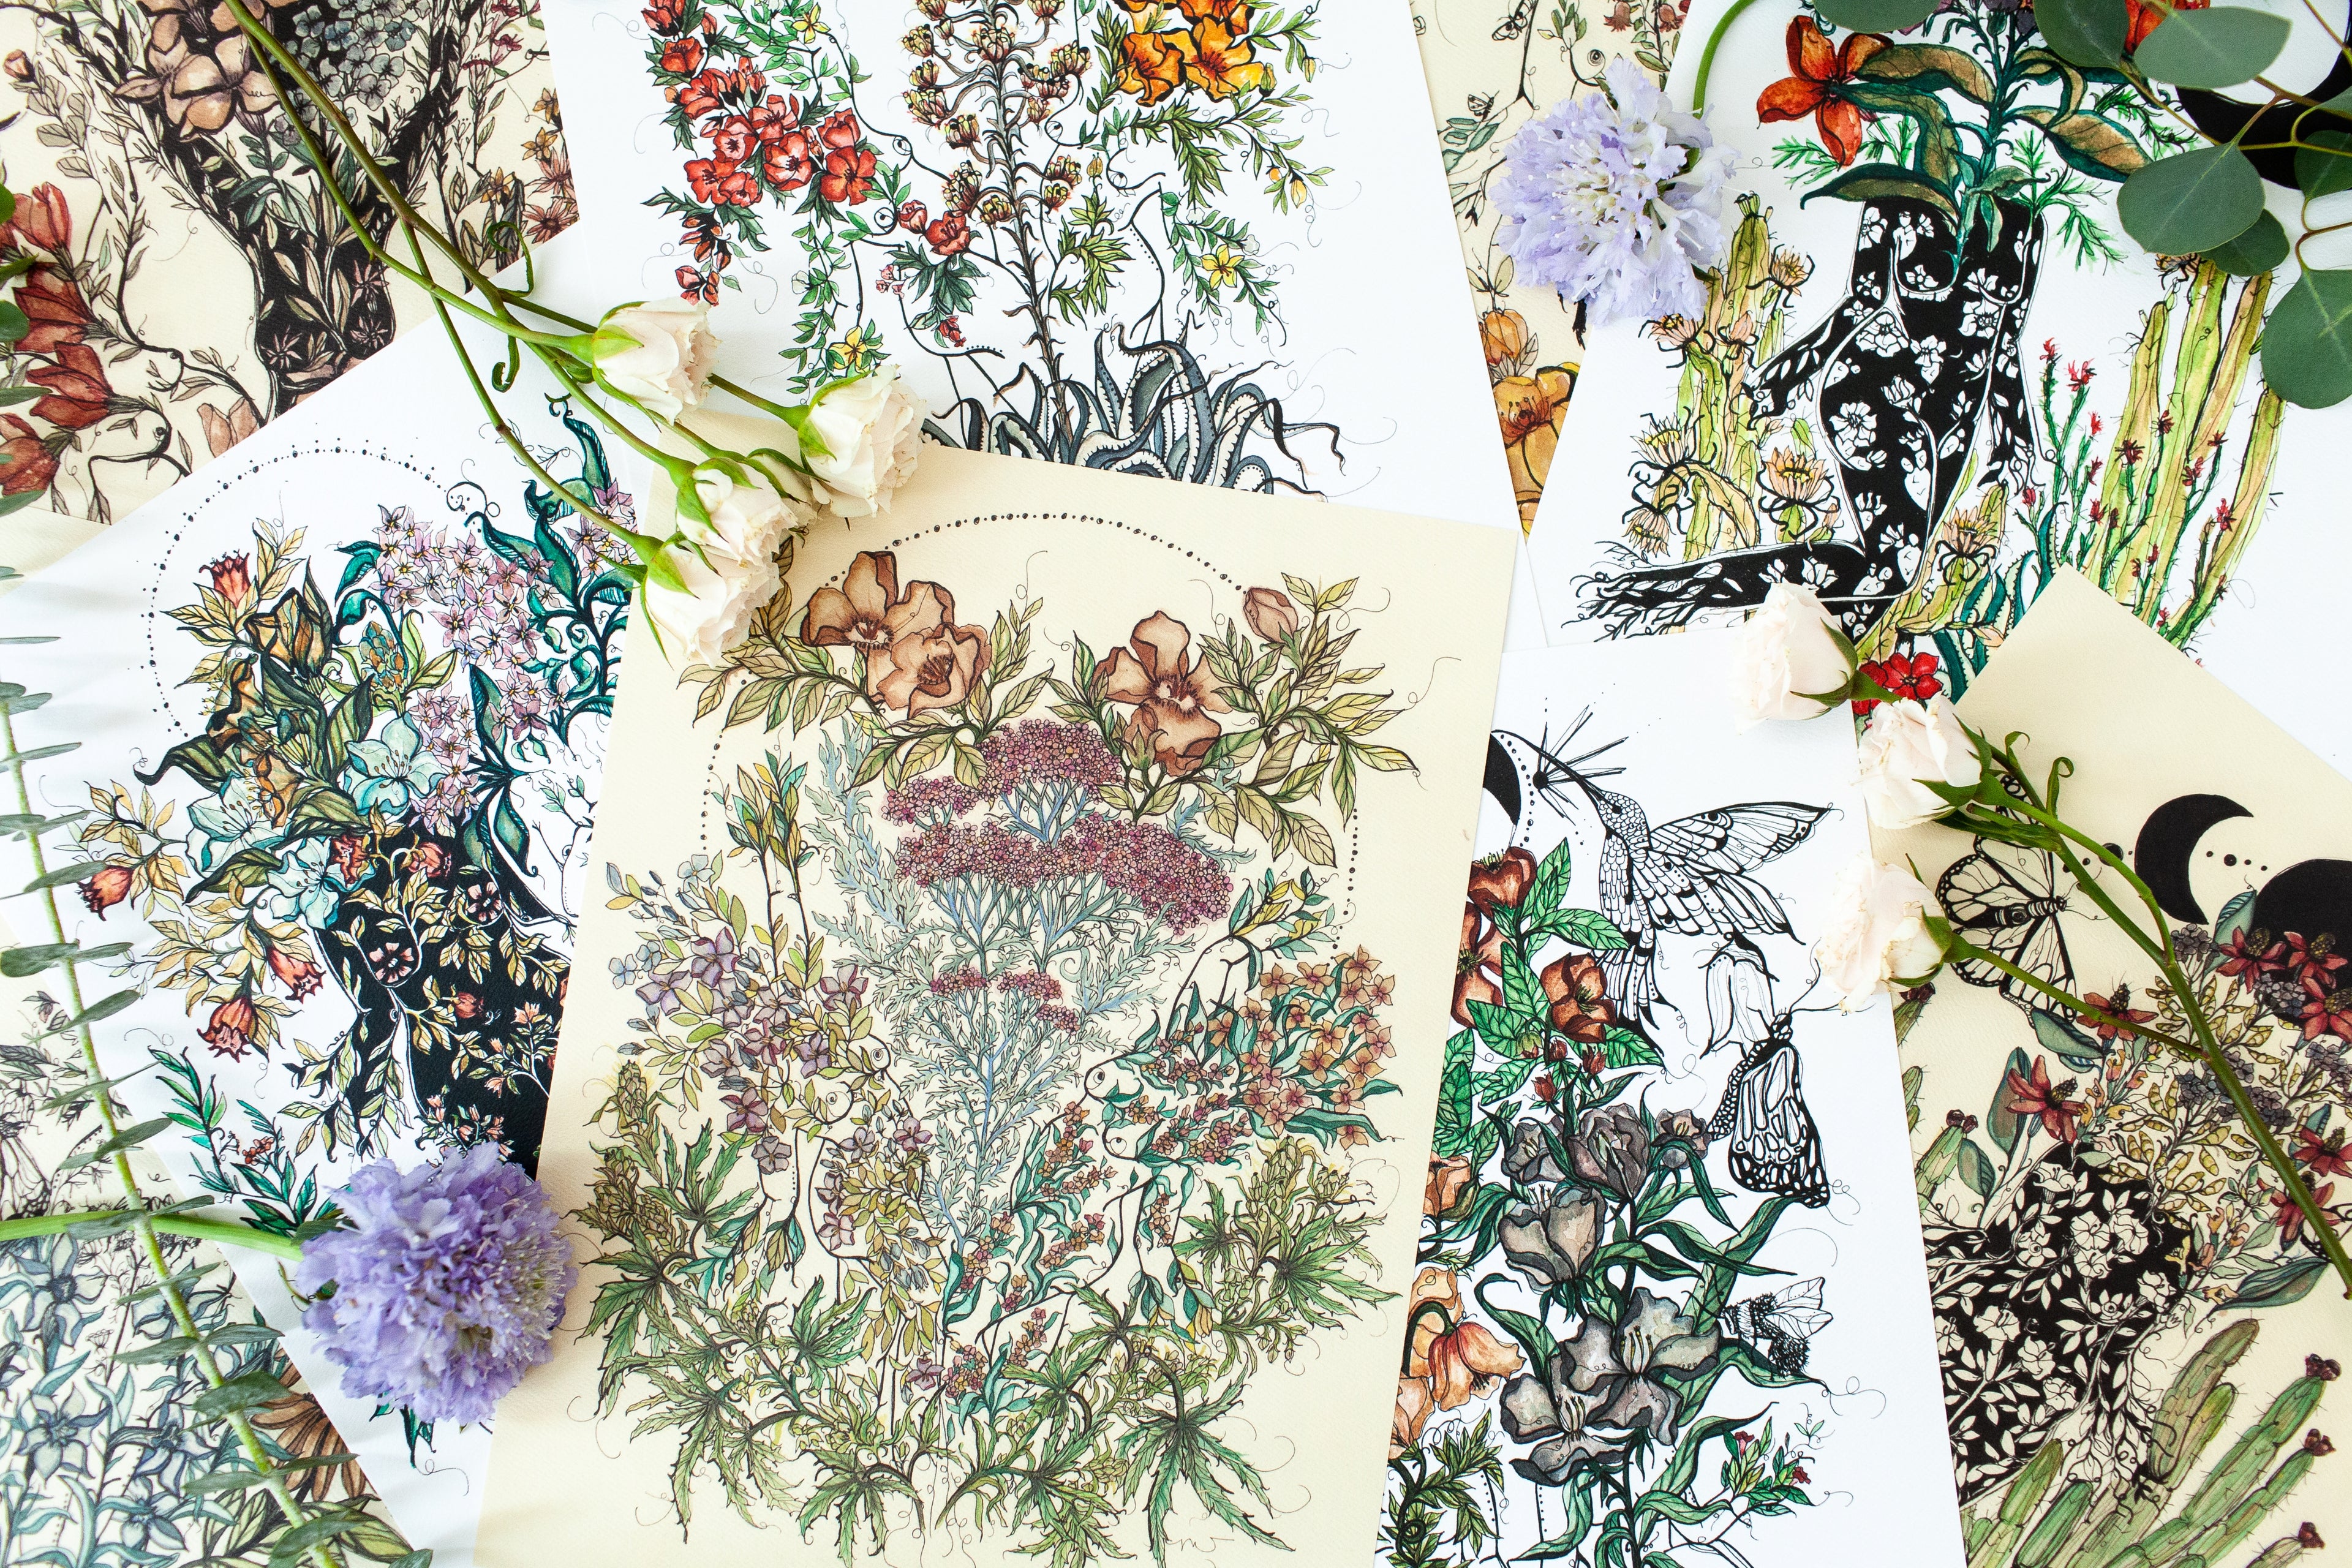 a pile of fine art prints from the artist marcy ellis depicting the female form surrounded by growing florals, plants and hummingbirds. 